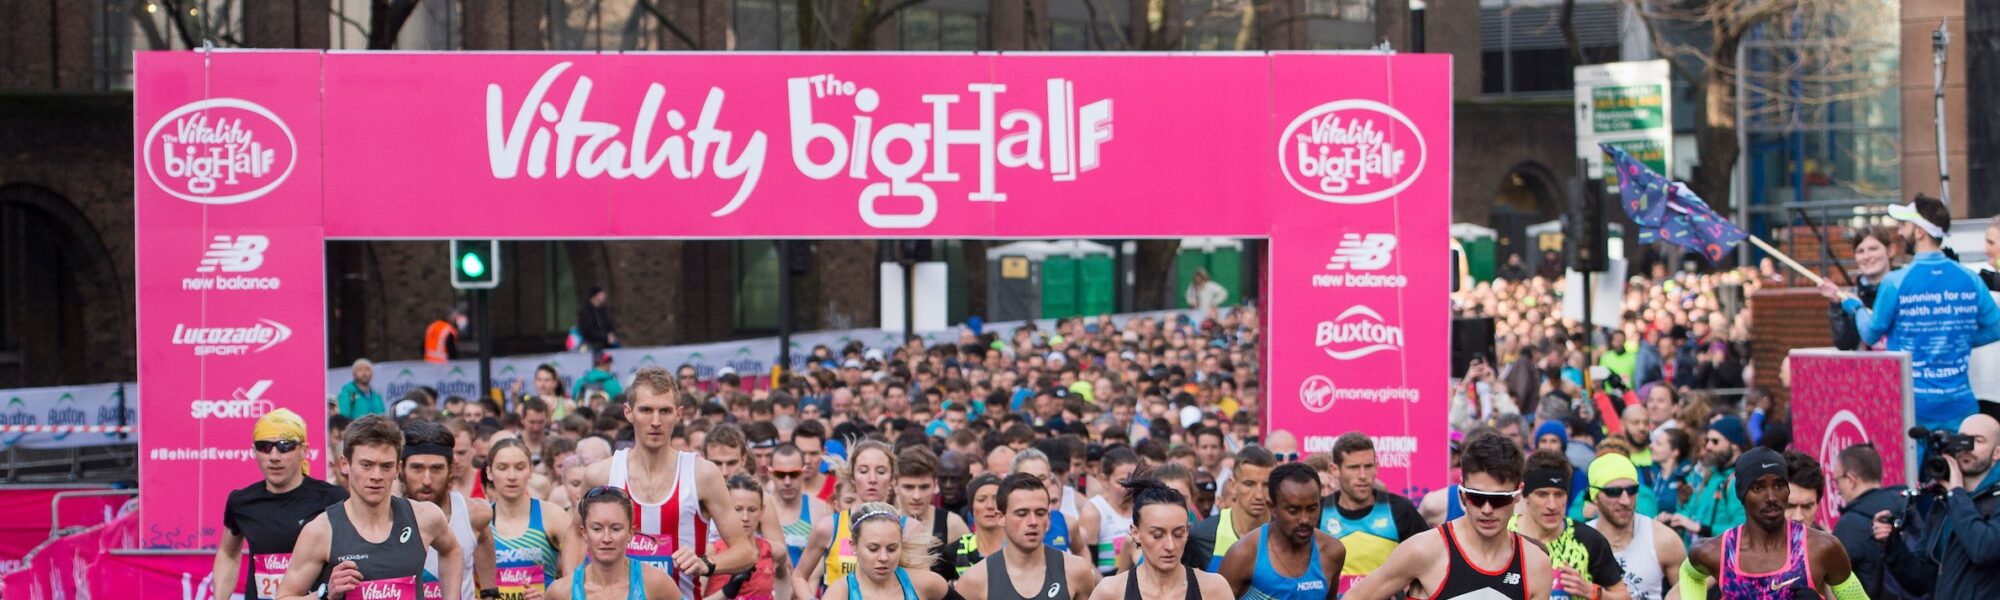 Picture shows runners at the start line of the Vitality Big Half 2019